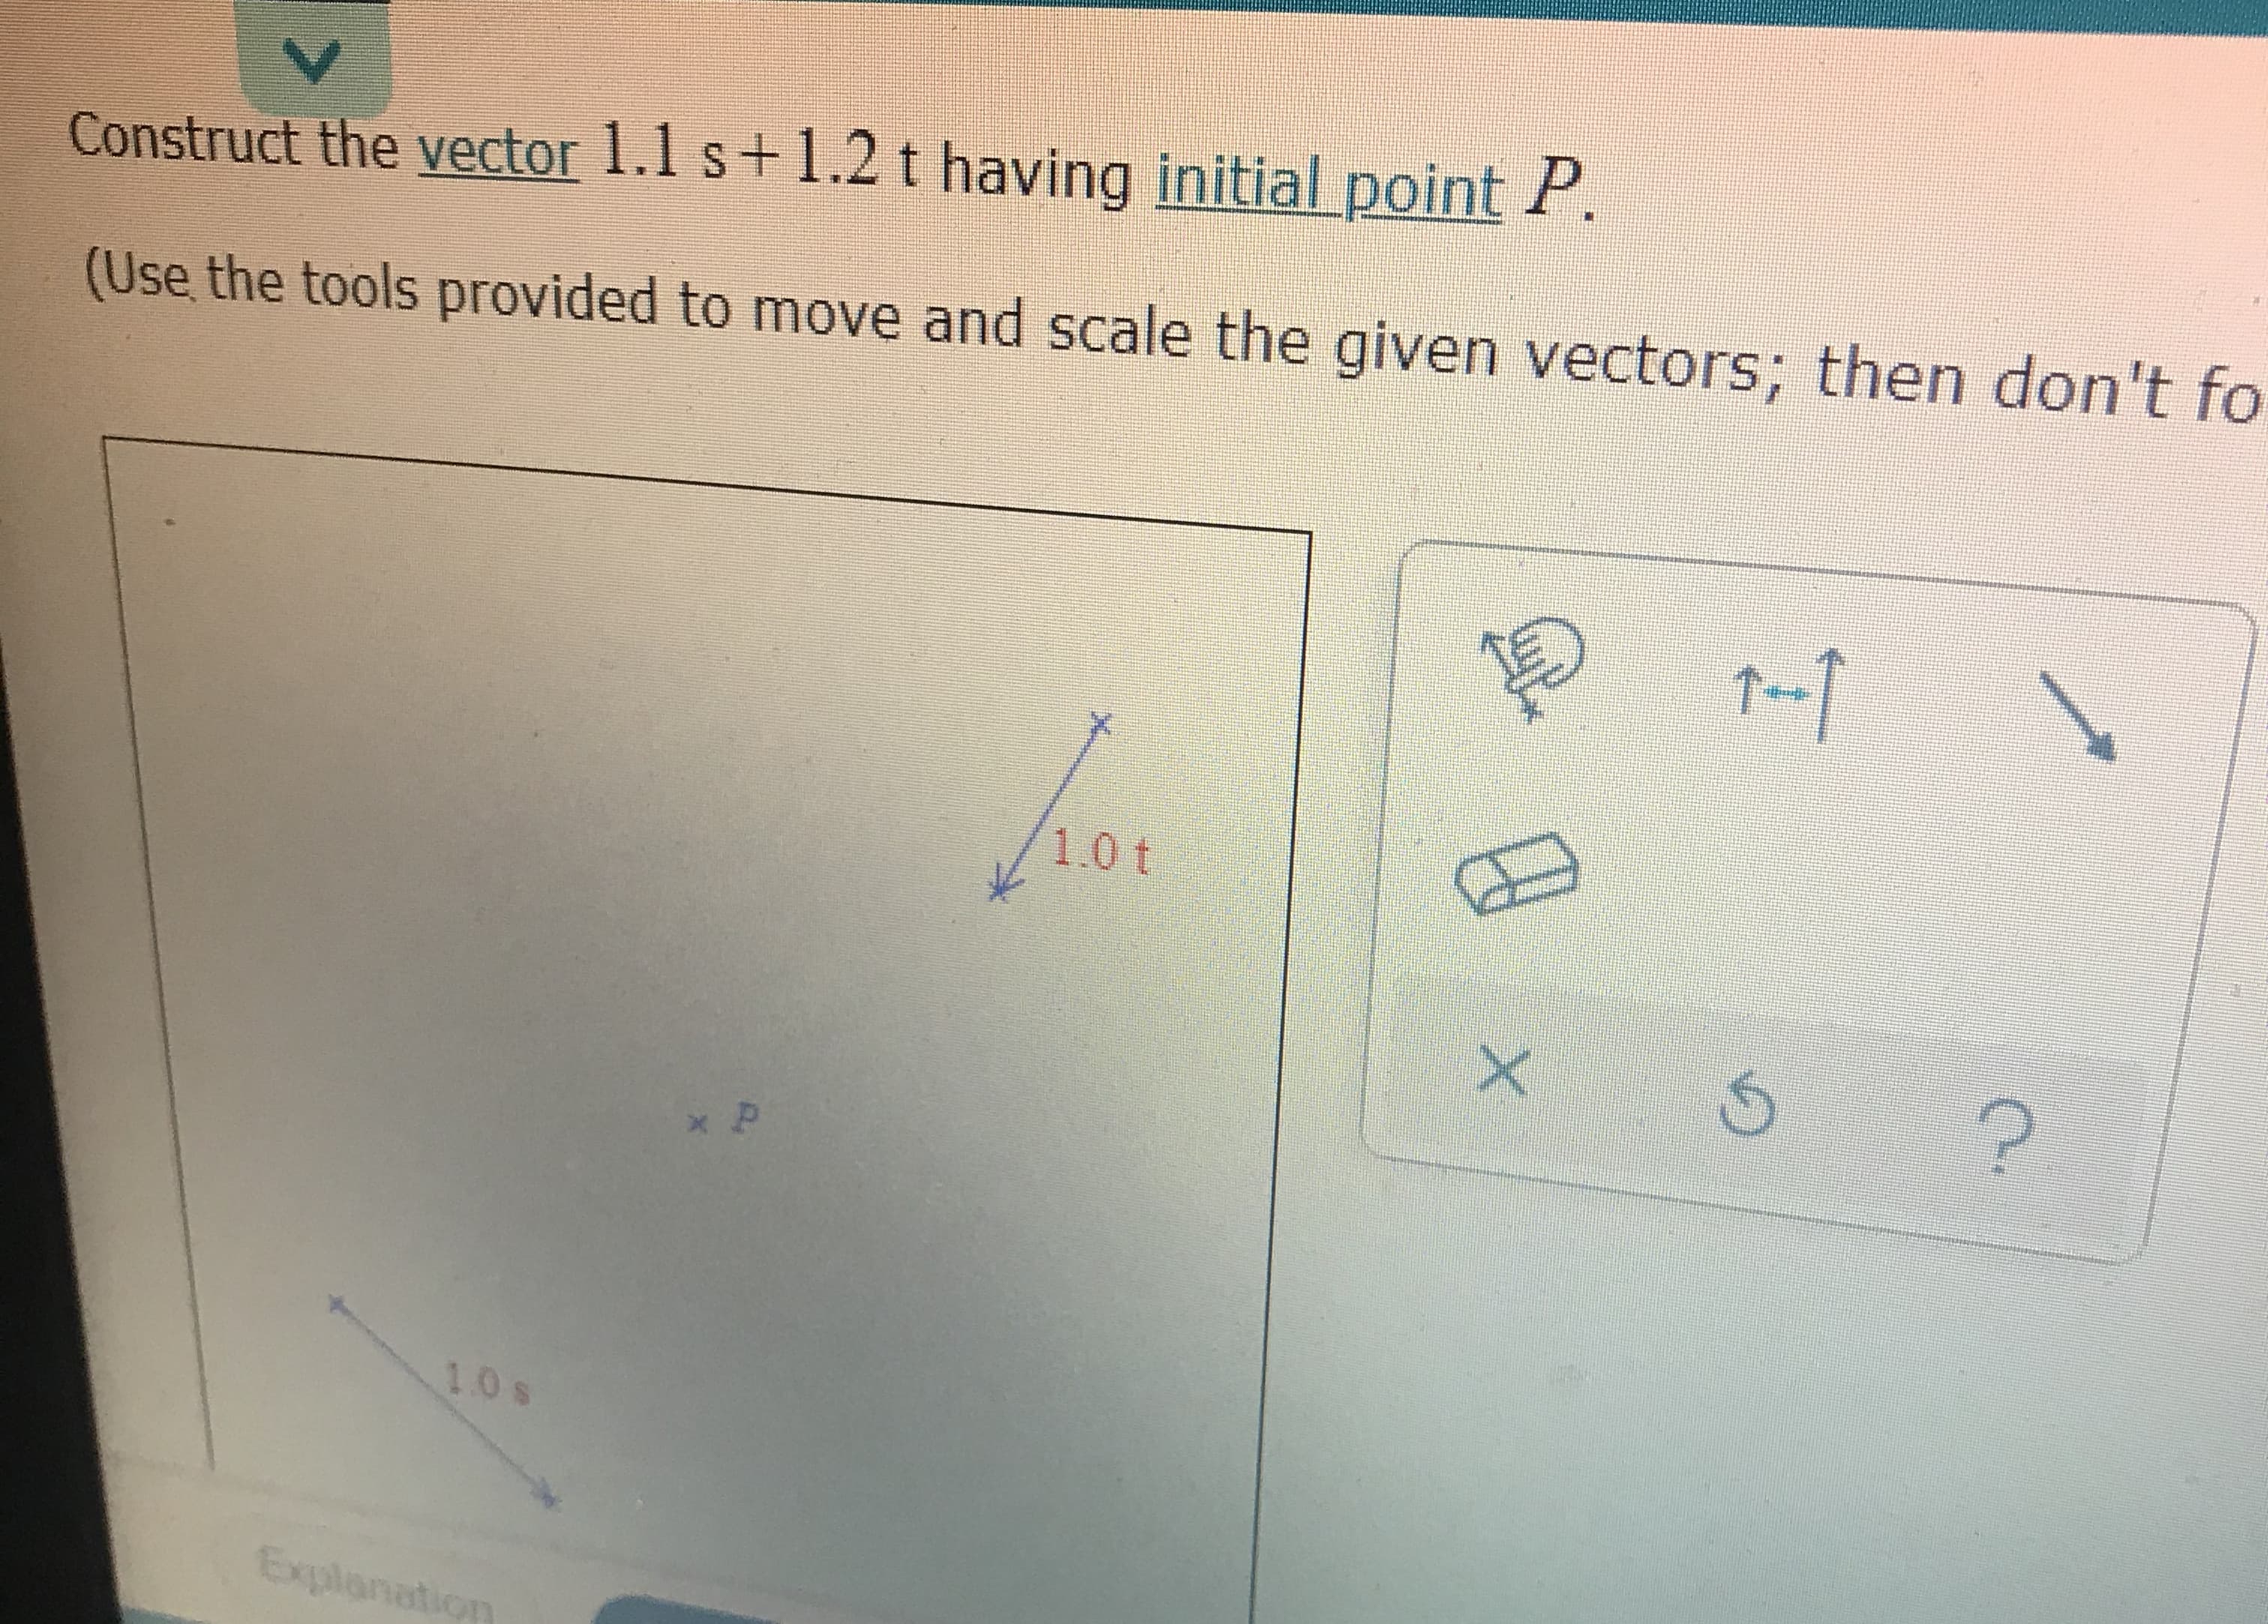 **Construct the Vector**

Construct the vector \(1.1\mathbf{s} + 1.2\mathbf{t}\) having initial point \(P\).

(Use the tools provided to move and scale the given vectors; then don't forget to... [text cut off]).

### Explanation of Diagram:

The diagram illustrates two vectors labeled "1.0 \(\mathbf{t}\)" and "1.0 \(\mathbf{s}\)", each represented by an arrow.

- The vector labeled "1.0 \(\mathbf{t}\)" is an arrow extending upward and to the right.
- The vector labeled "1.0 \(\mathbf{s}\)" is an arrow extending downward and to the left.
- Point \(P\) is marked as the initial point for the vector construction.

### Interactive Tools:

The task provides several interactive tools (icons) to assist with the vector construction:

1. **Rotate Tool**: To rotate vectors.
2. **Scale Tool**: To adjust the length of vectors.
3. **Move Tool**: To reposition vectors on the plane.
4. **Erase Tool**: To remove vectors from the plane.
5. **Undo Tool**: To undo the previous action.
6. **Help Tool**: To access additional instructions or guidance. 

(Note: The exact tools may have specific actions not detailed due to partial visibility in the image.)